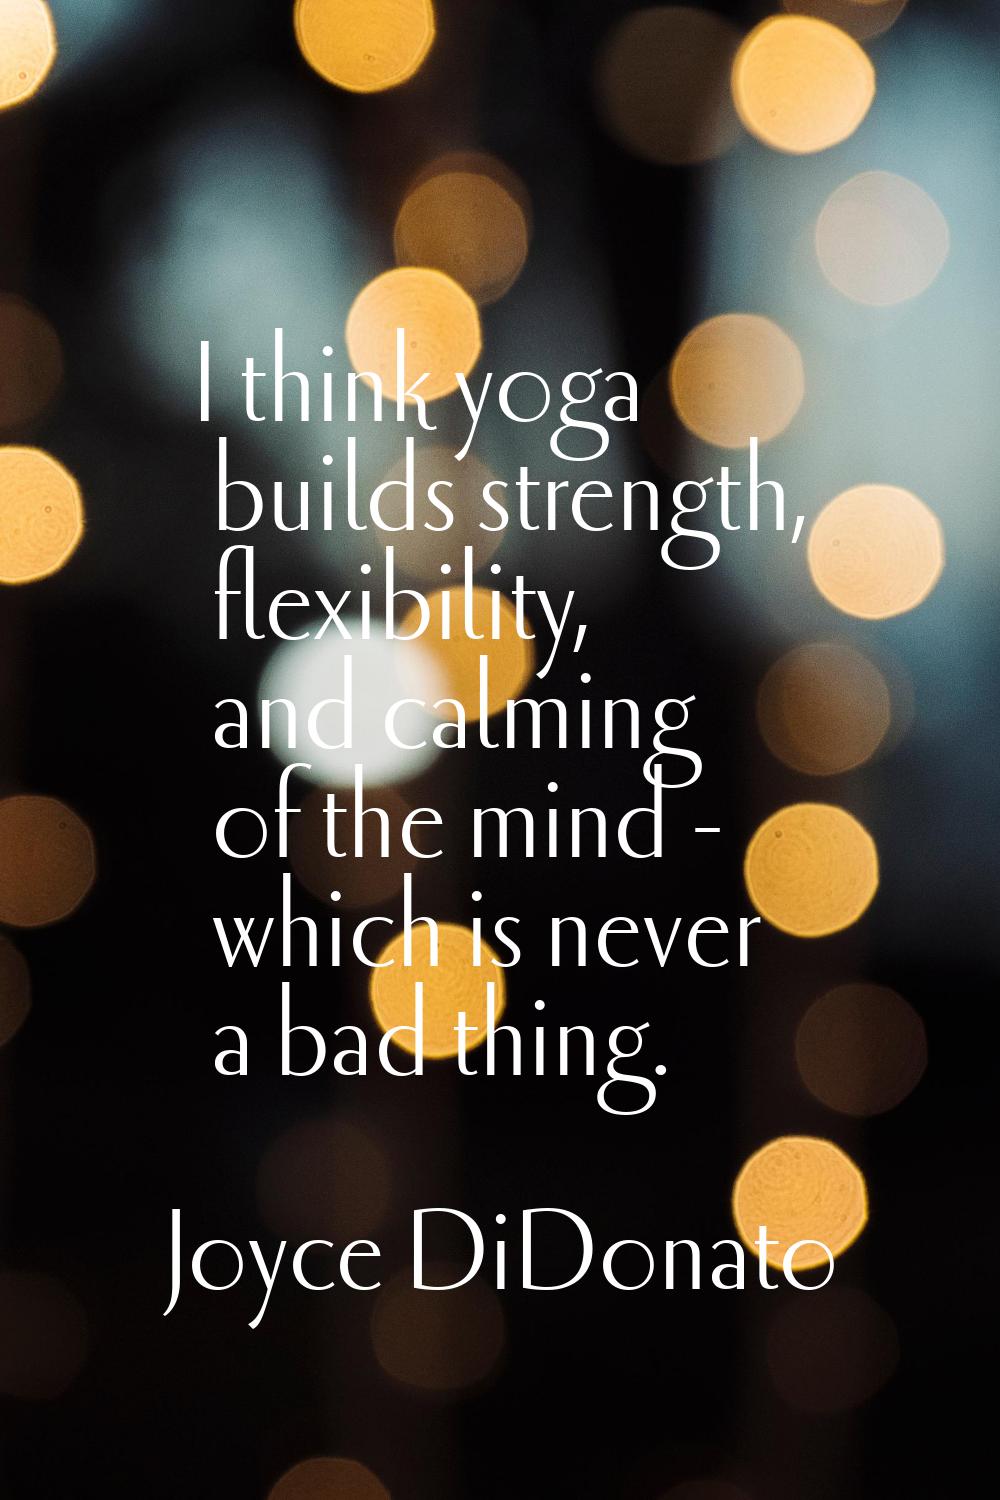 I think yoga builds strength, flexibility, and calming of the mind - which is never a bad thing.